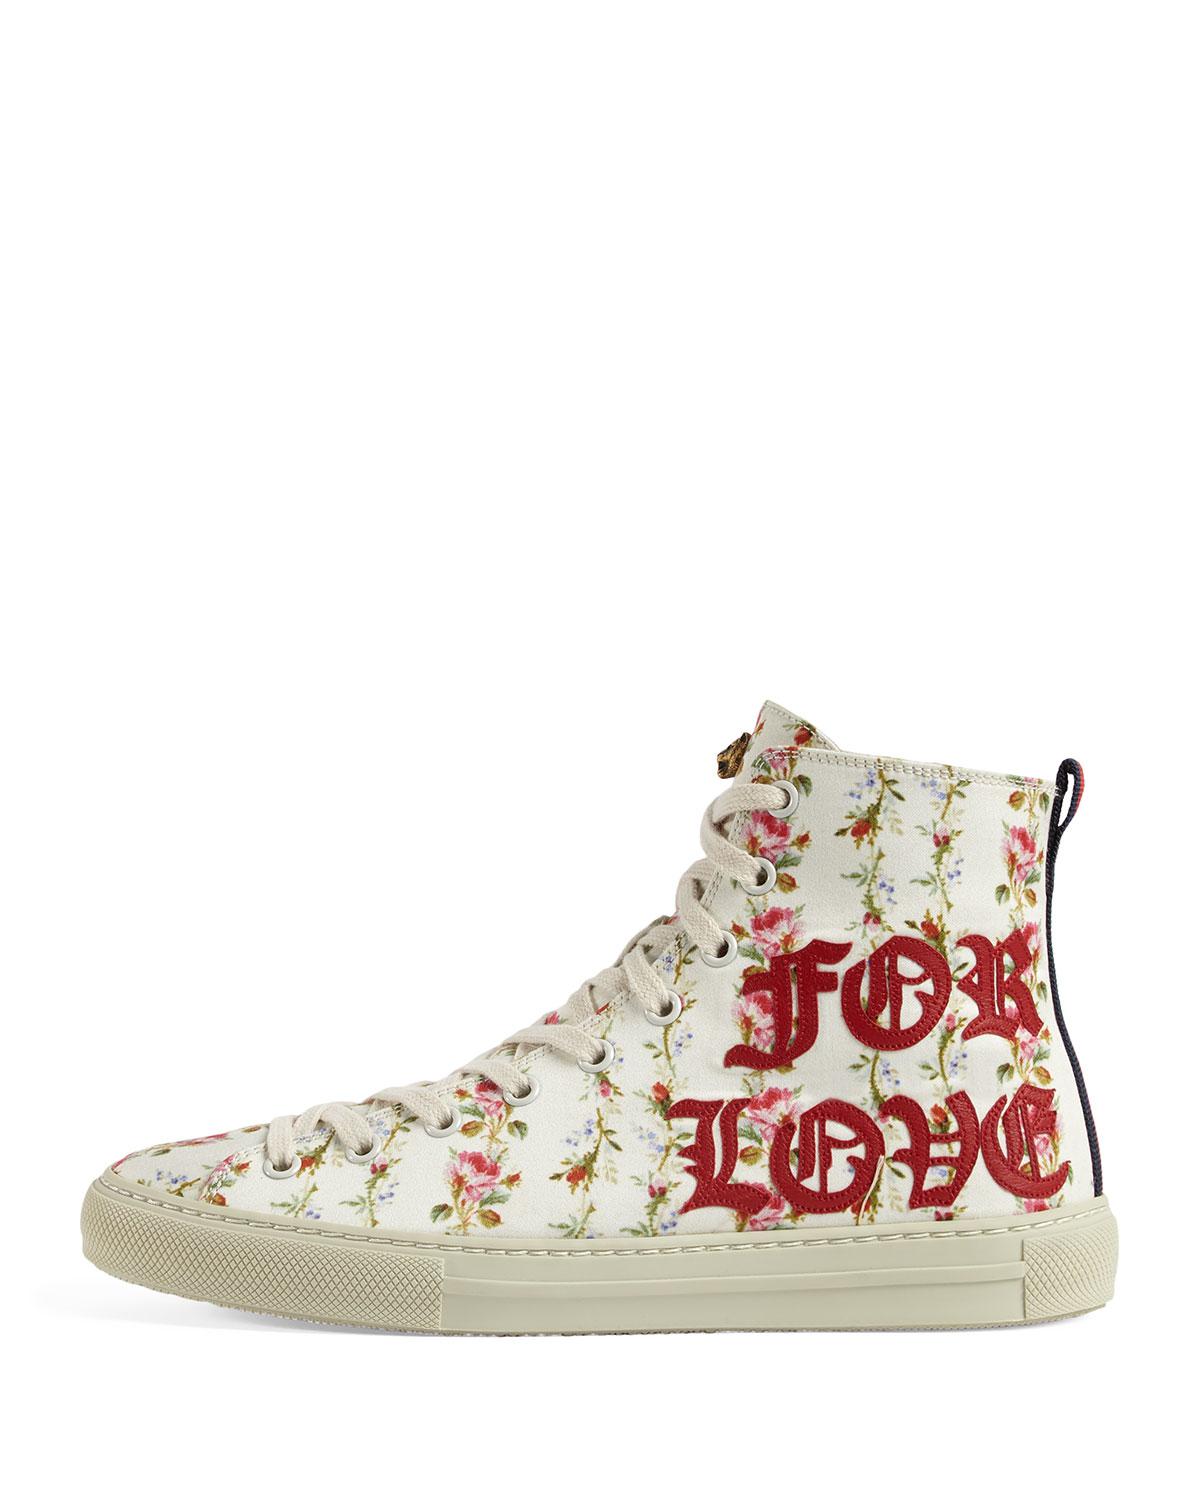 Download Gucci Canvas Major Blind For Love High-top Sneaker in ...